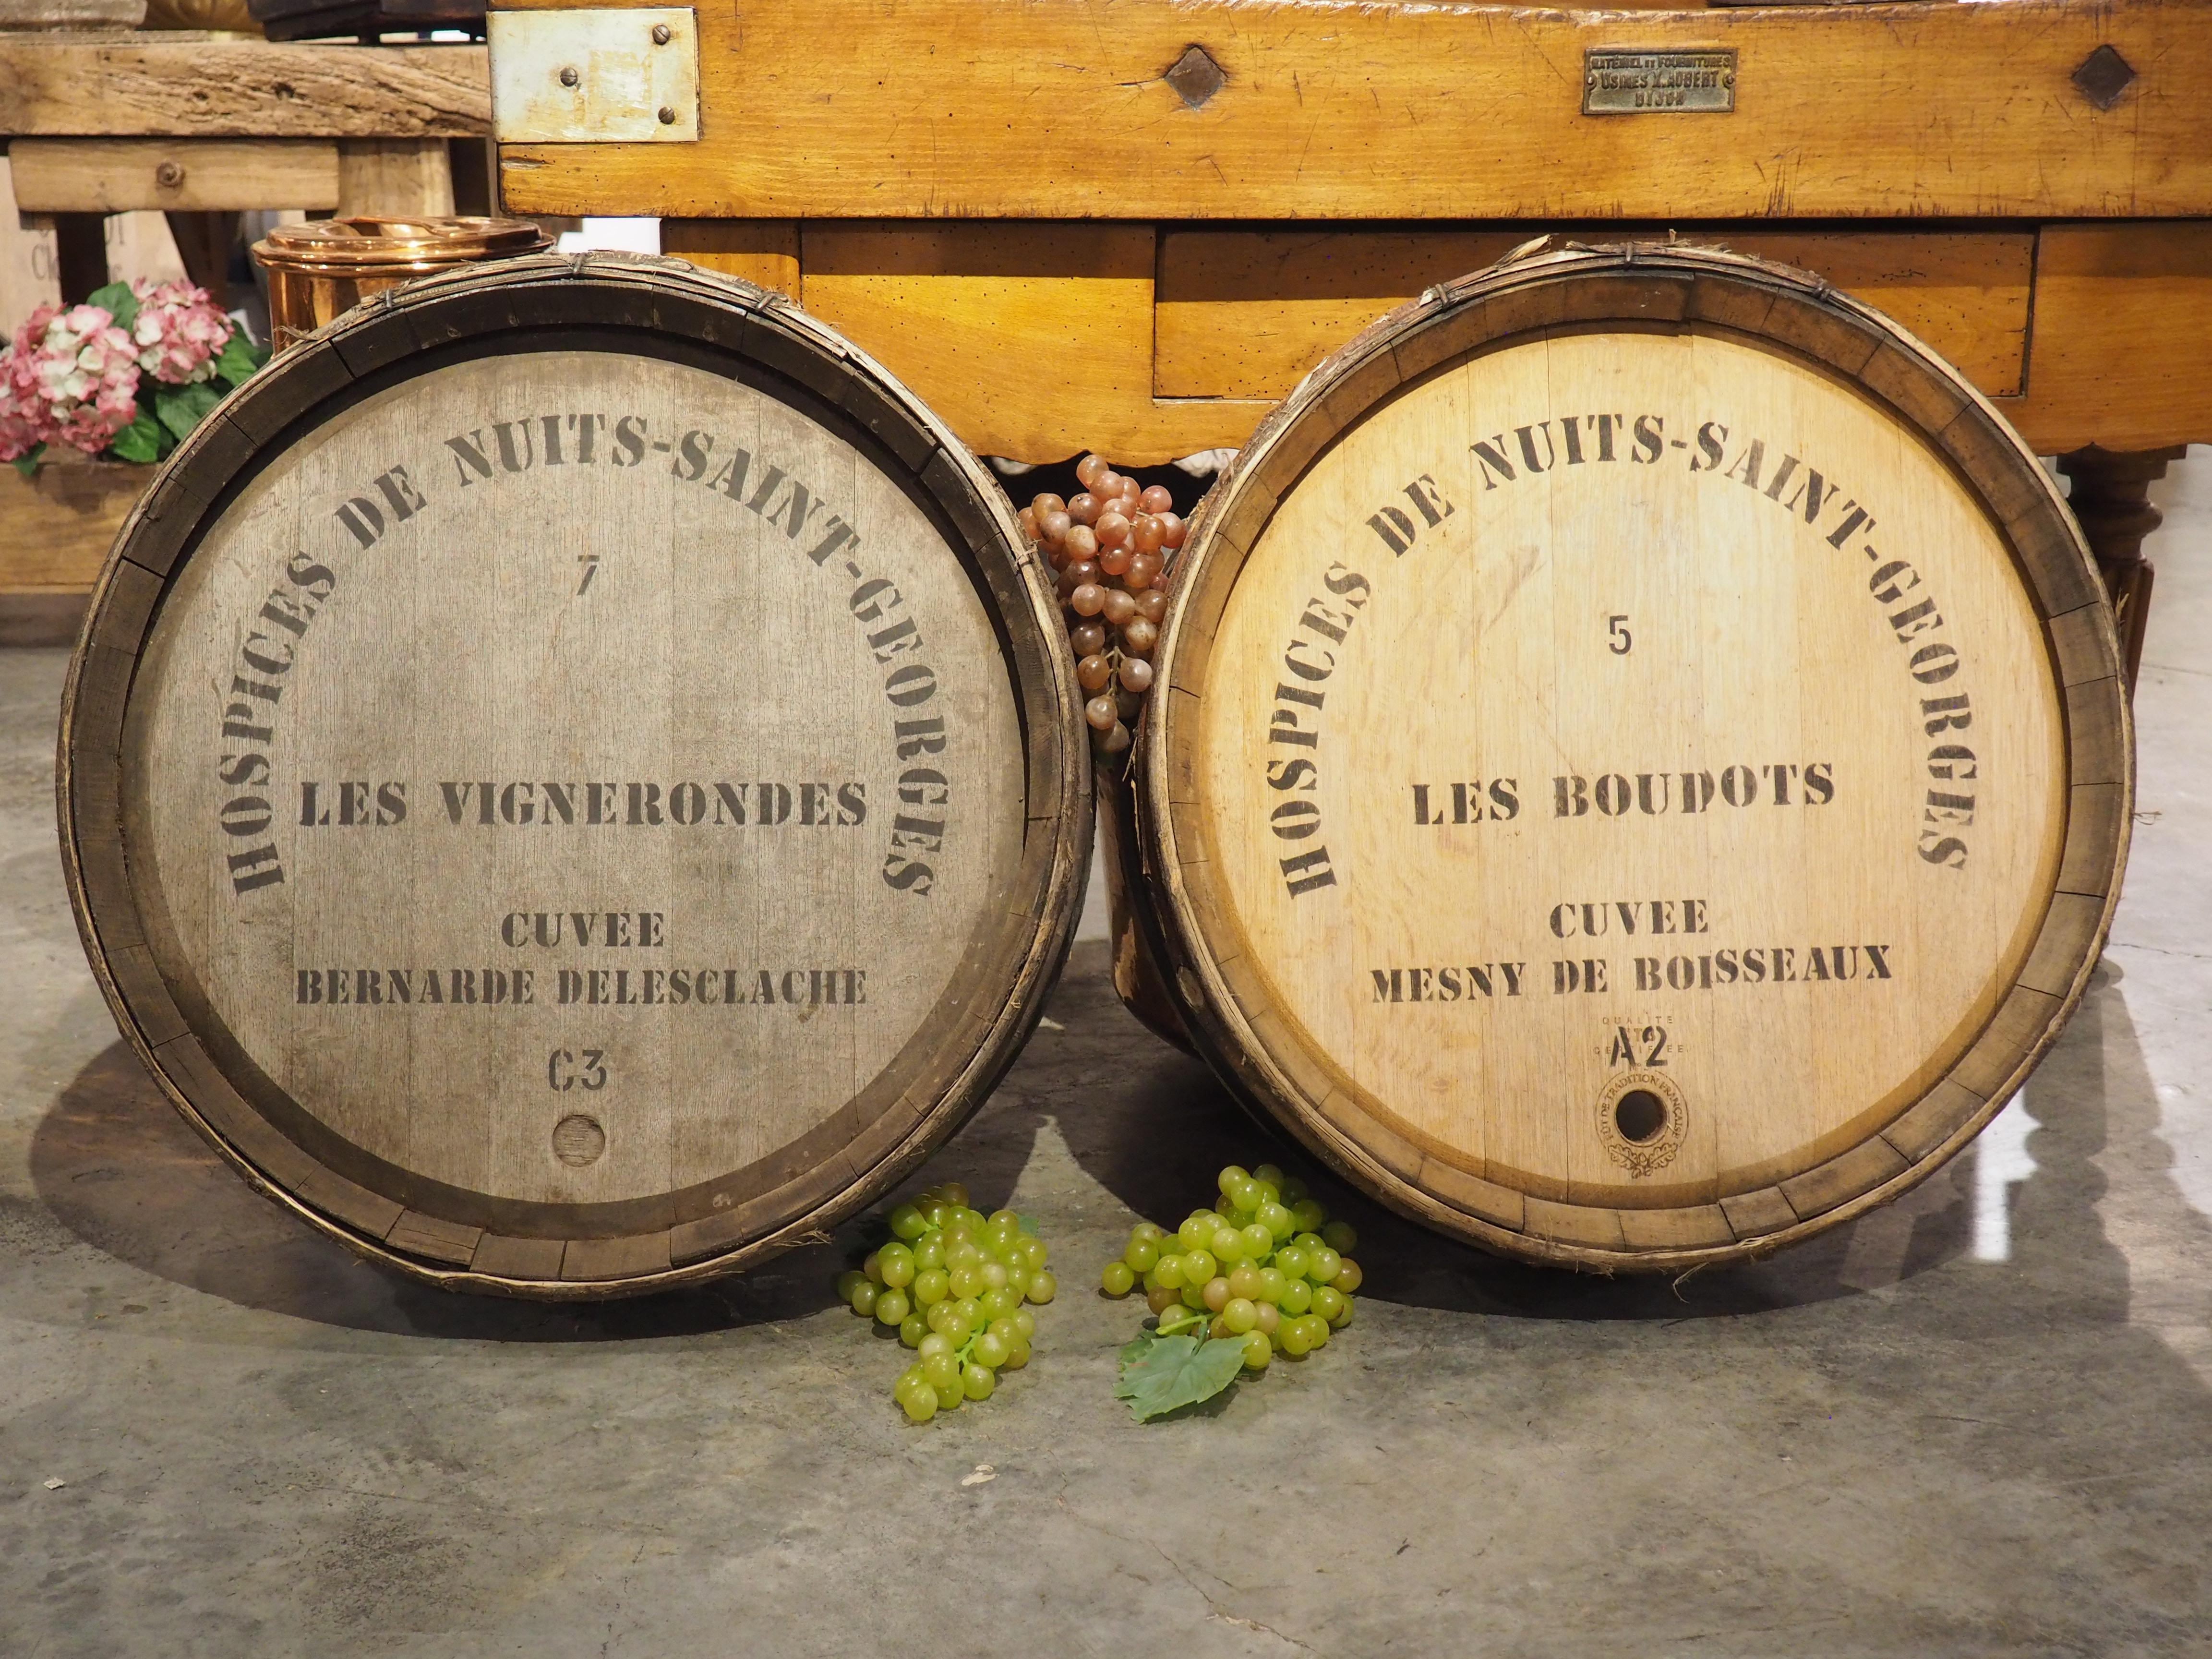 Pair of French Wine Barrel Facades, “Hospices de Nuits-Saint-Georges”, 1900s For Sale 11